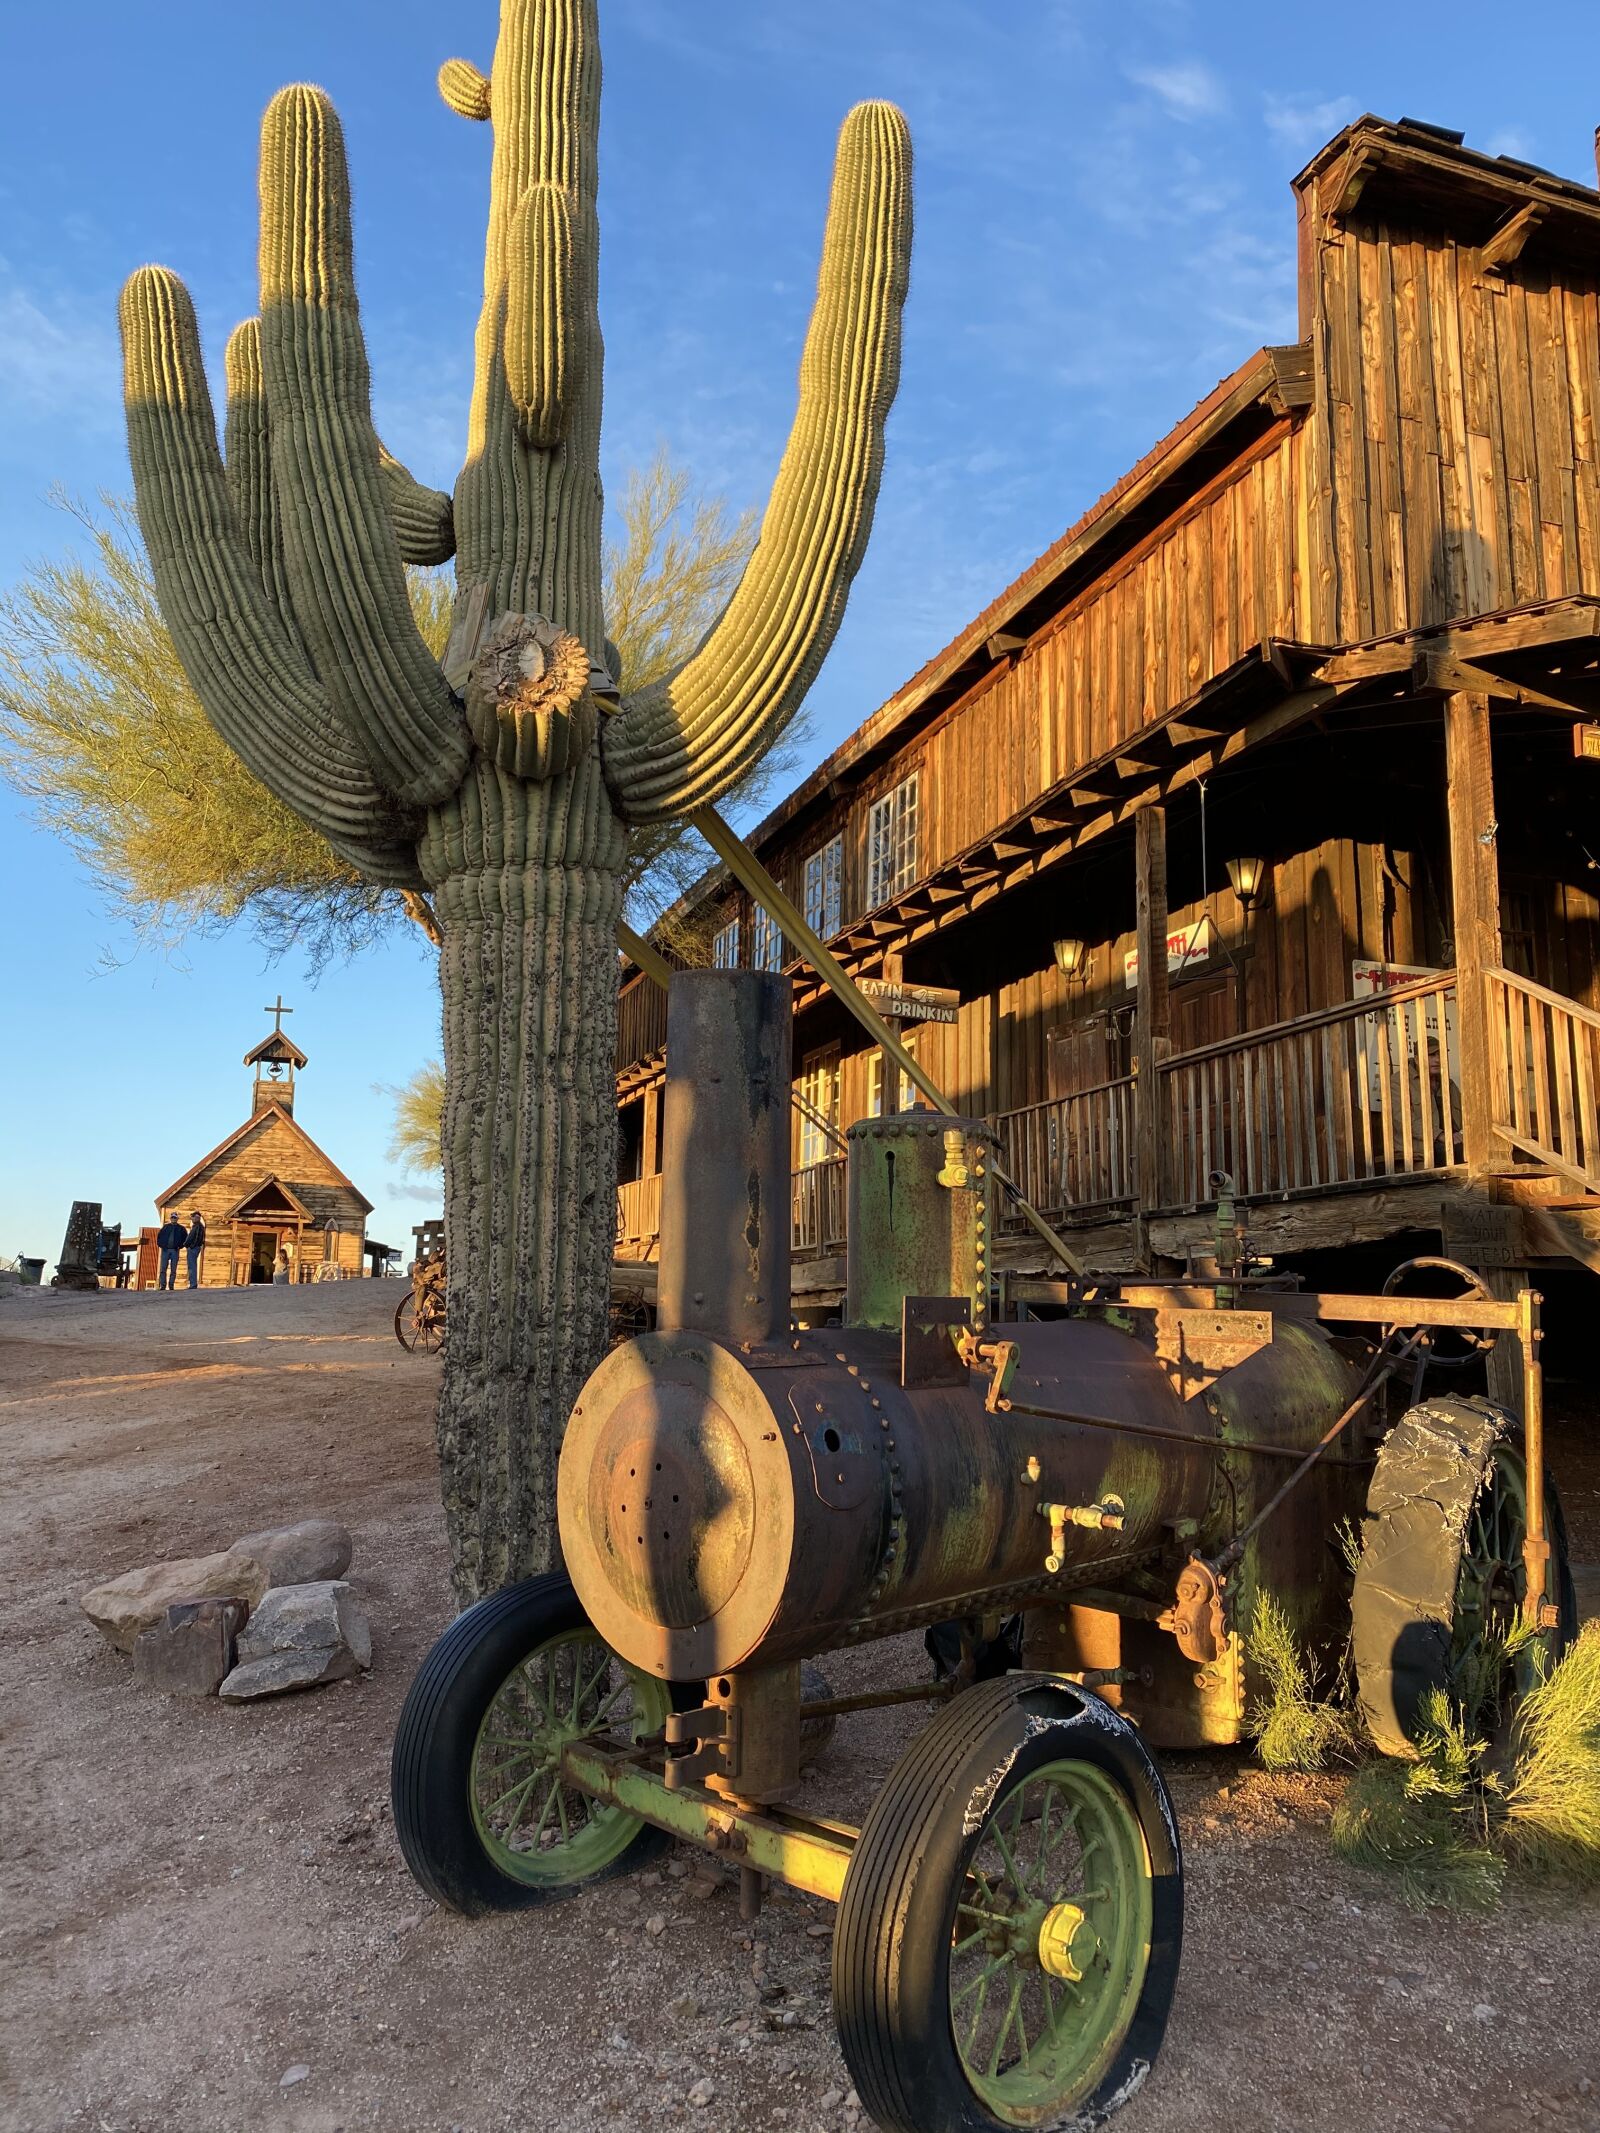 iPhone 11 Pro Max back triple camera 4.25mm f/1.8 sample photo. Superstition mountain, church, town photography